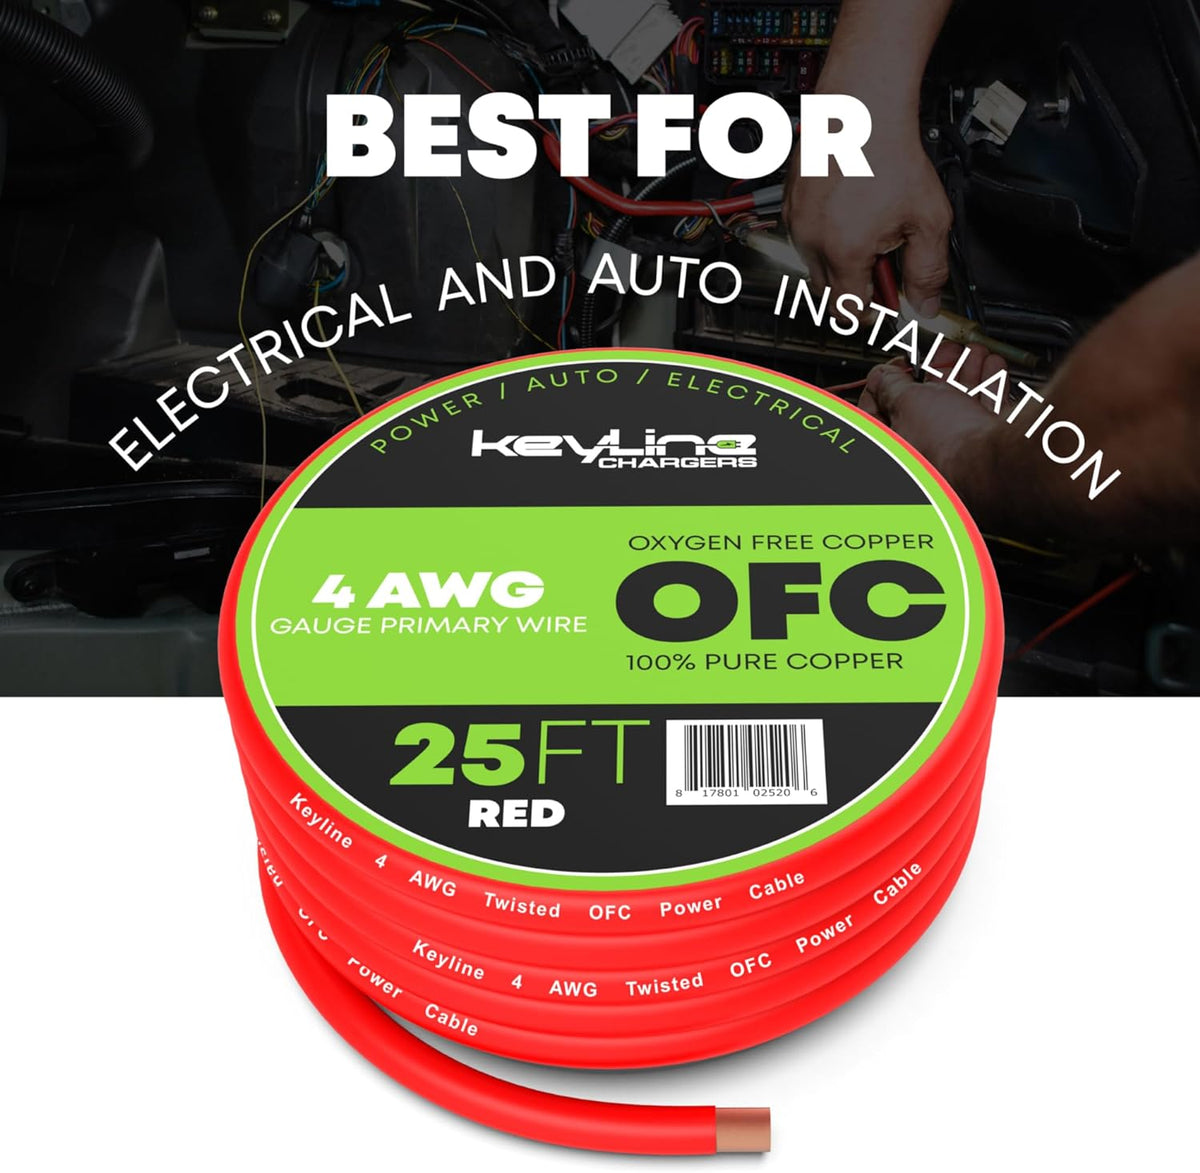 OFC 4 AWG Gauge Wire (25ft) Red | Oxygen Free Copper, Automotive Wire, Power/Ground, Battery Cable, True Spec Welding & Automotive, Car Audio Speaker, RV Trailer, Amp Wiring by Keyline Chargers